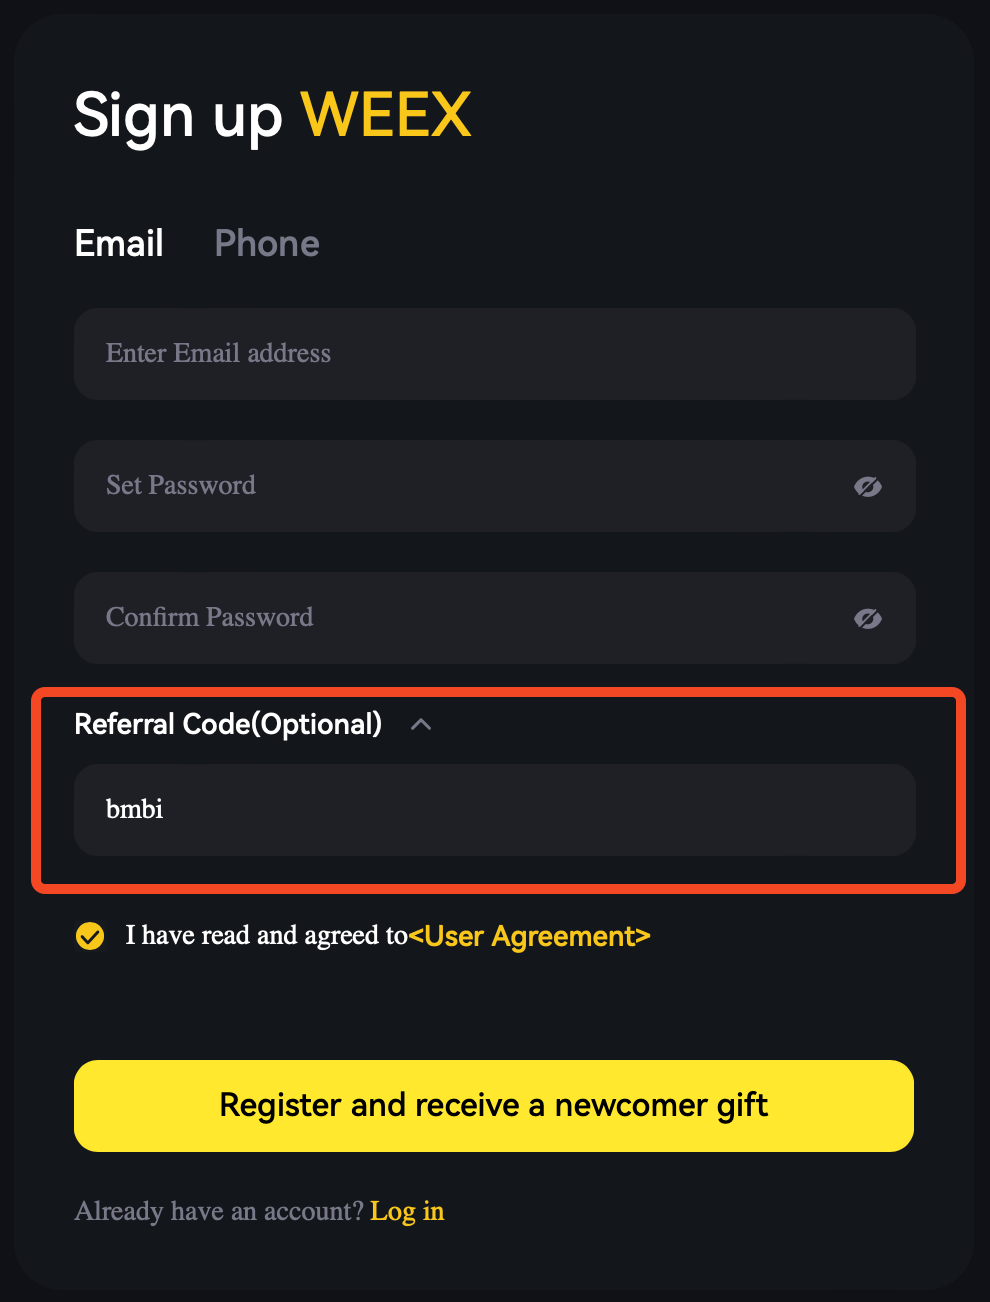 Registration Form using the WEEX Referral Code